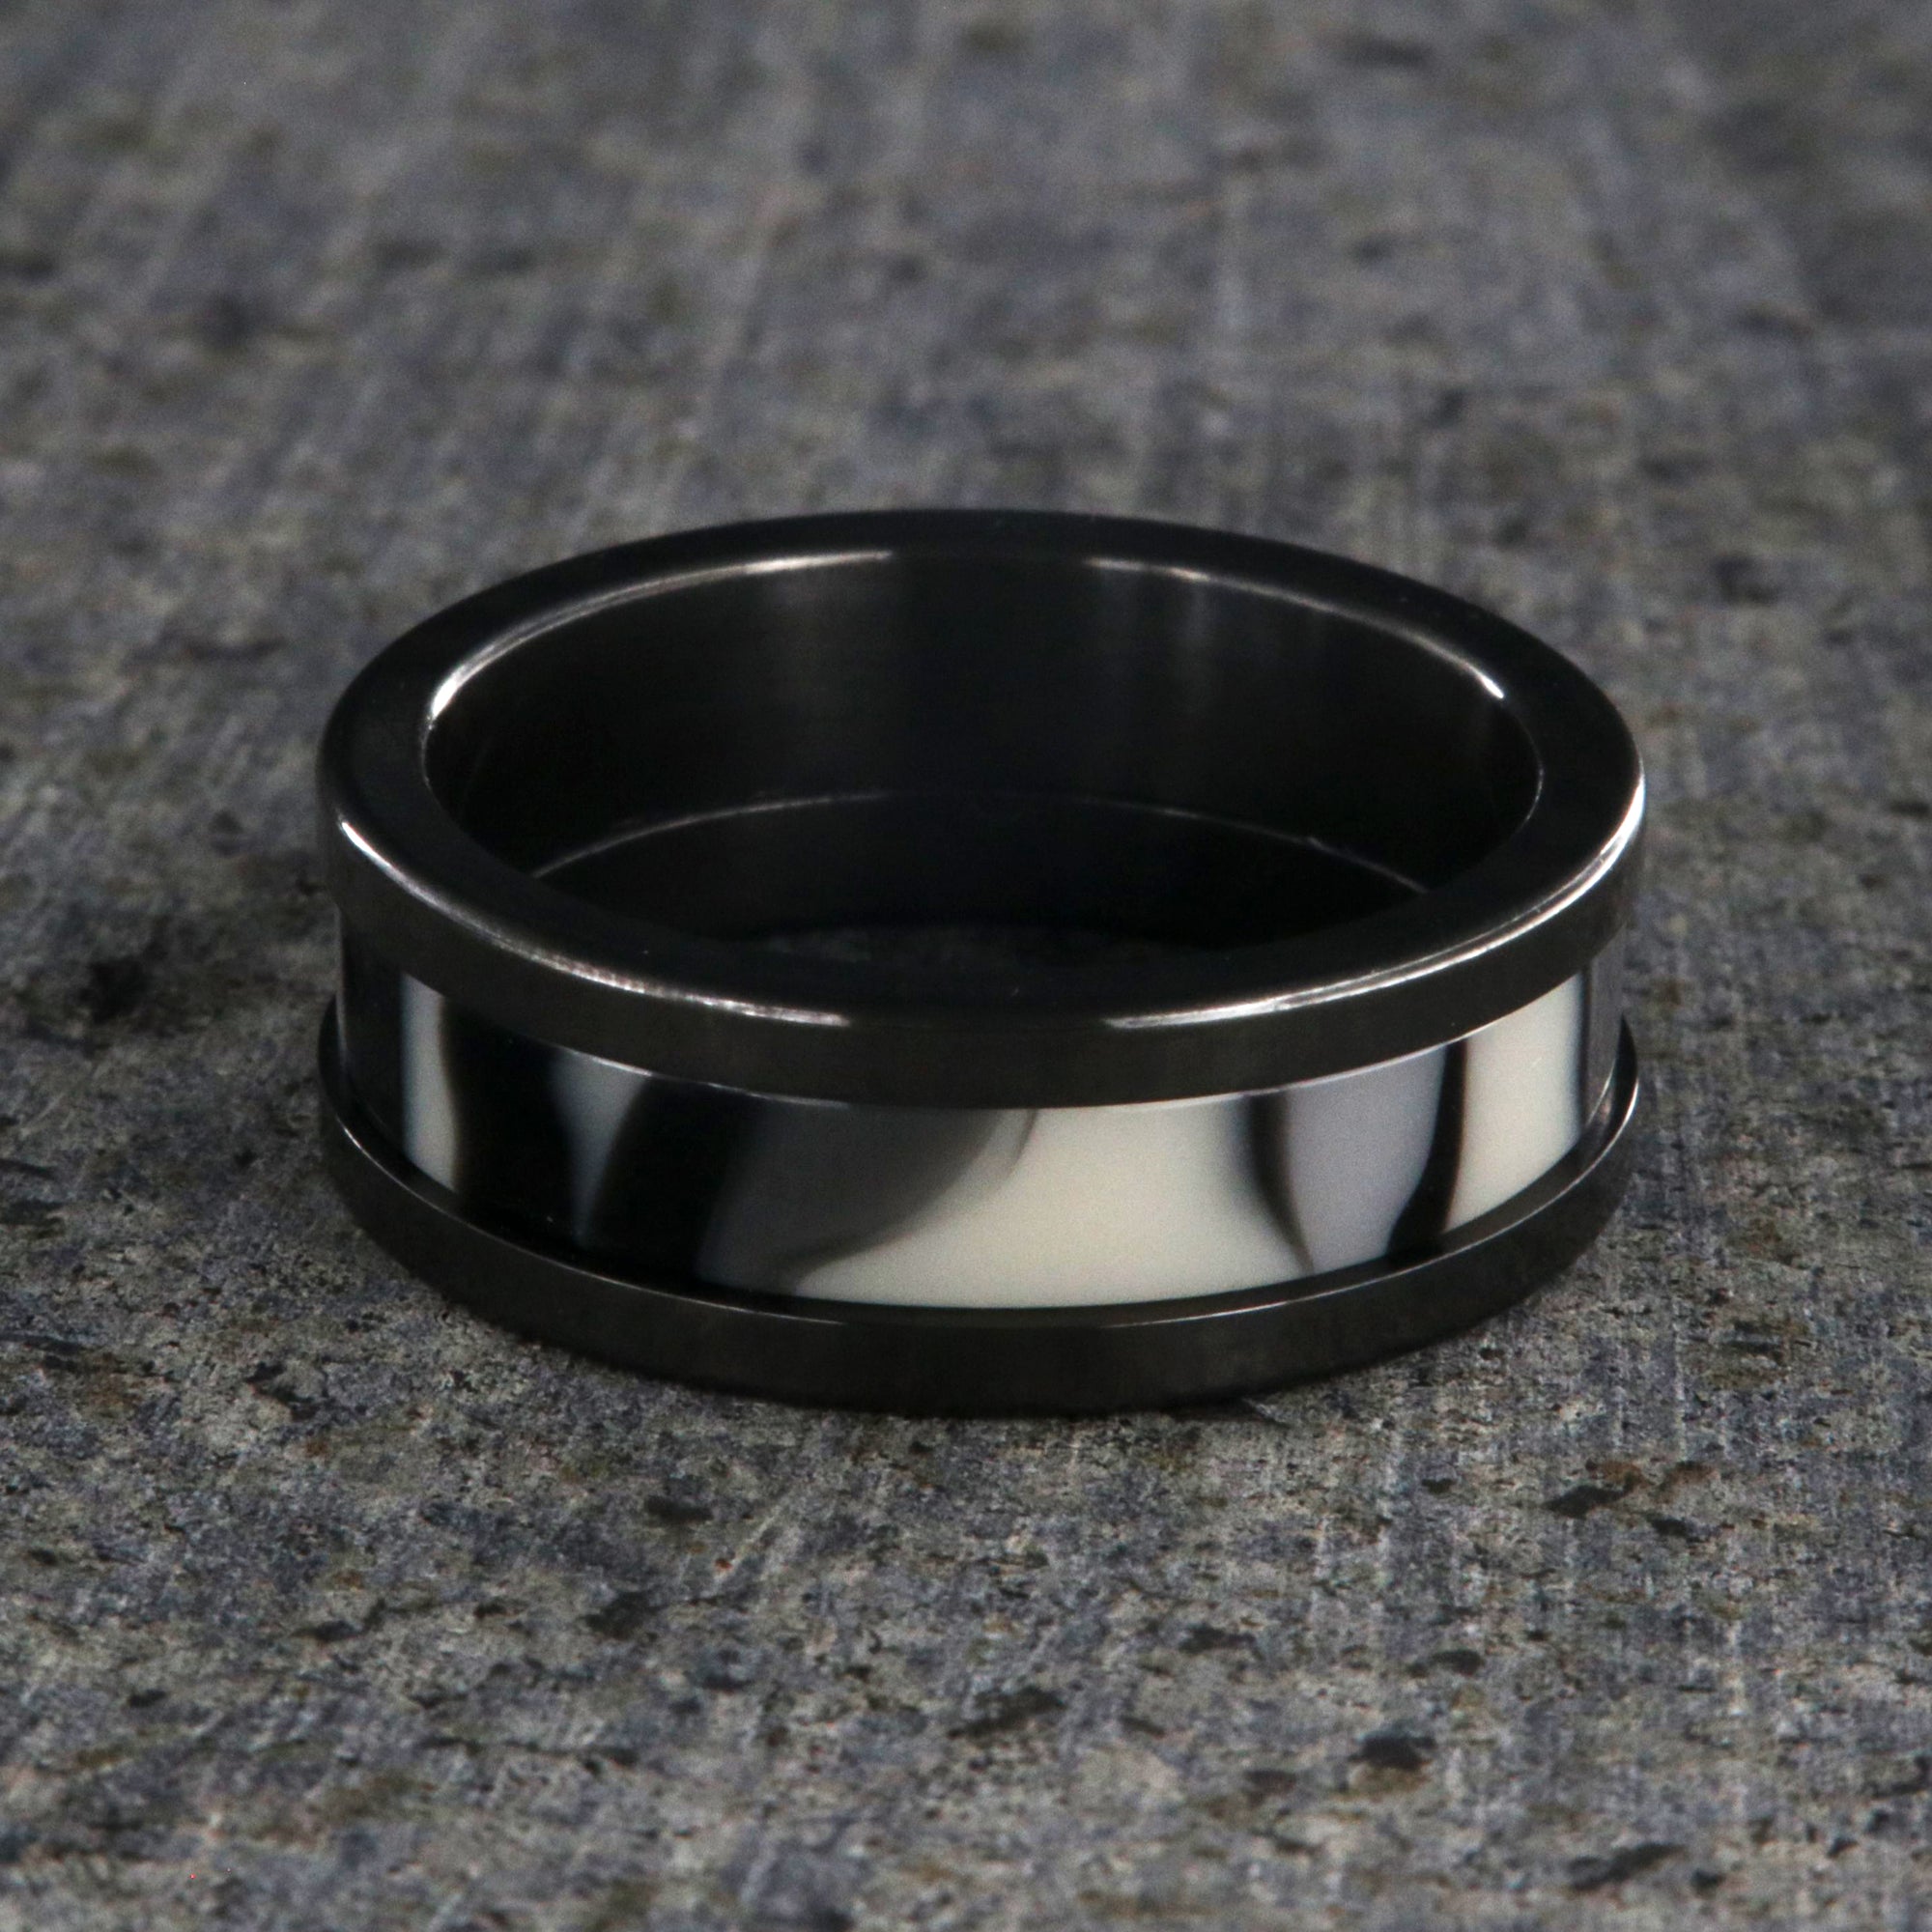 8mm wide black zirconium ring with a black and white camouflage patterned inlay